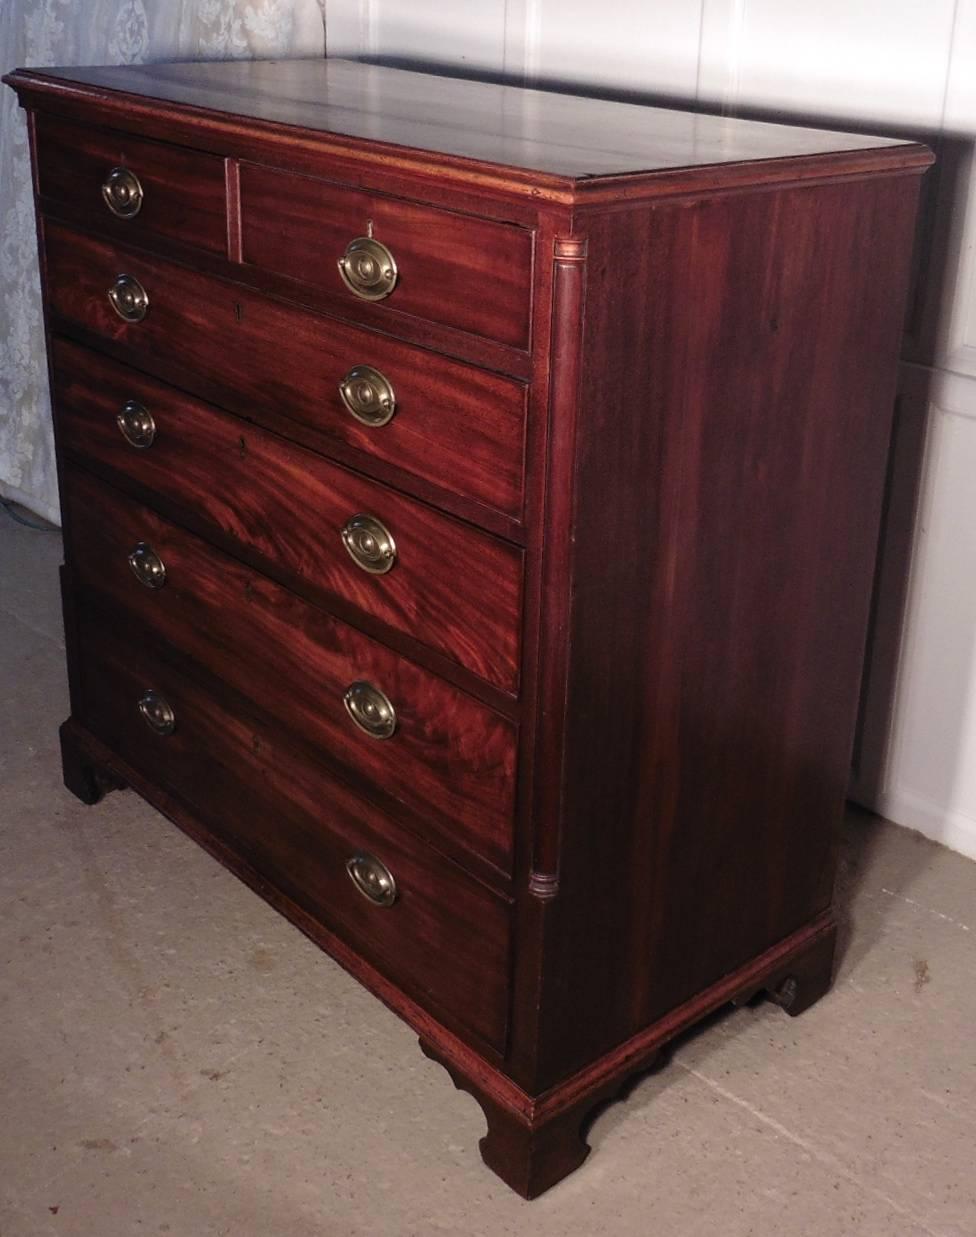 This chest is an unusual size it has six drawers in all, it has two short drawers at the top and four graduated long drawers beneath, another unusual feature of this piece is it has moulded columns set in to the corners.
This is a big chest of